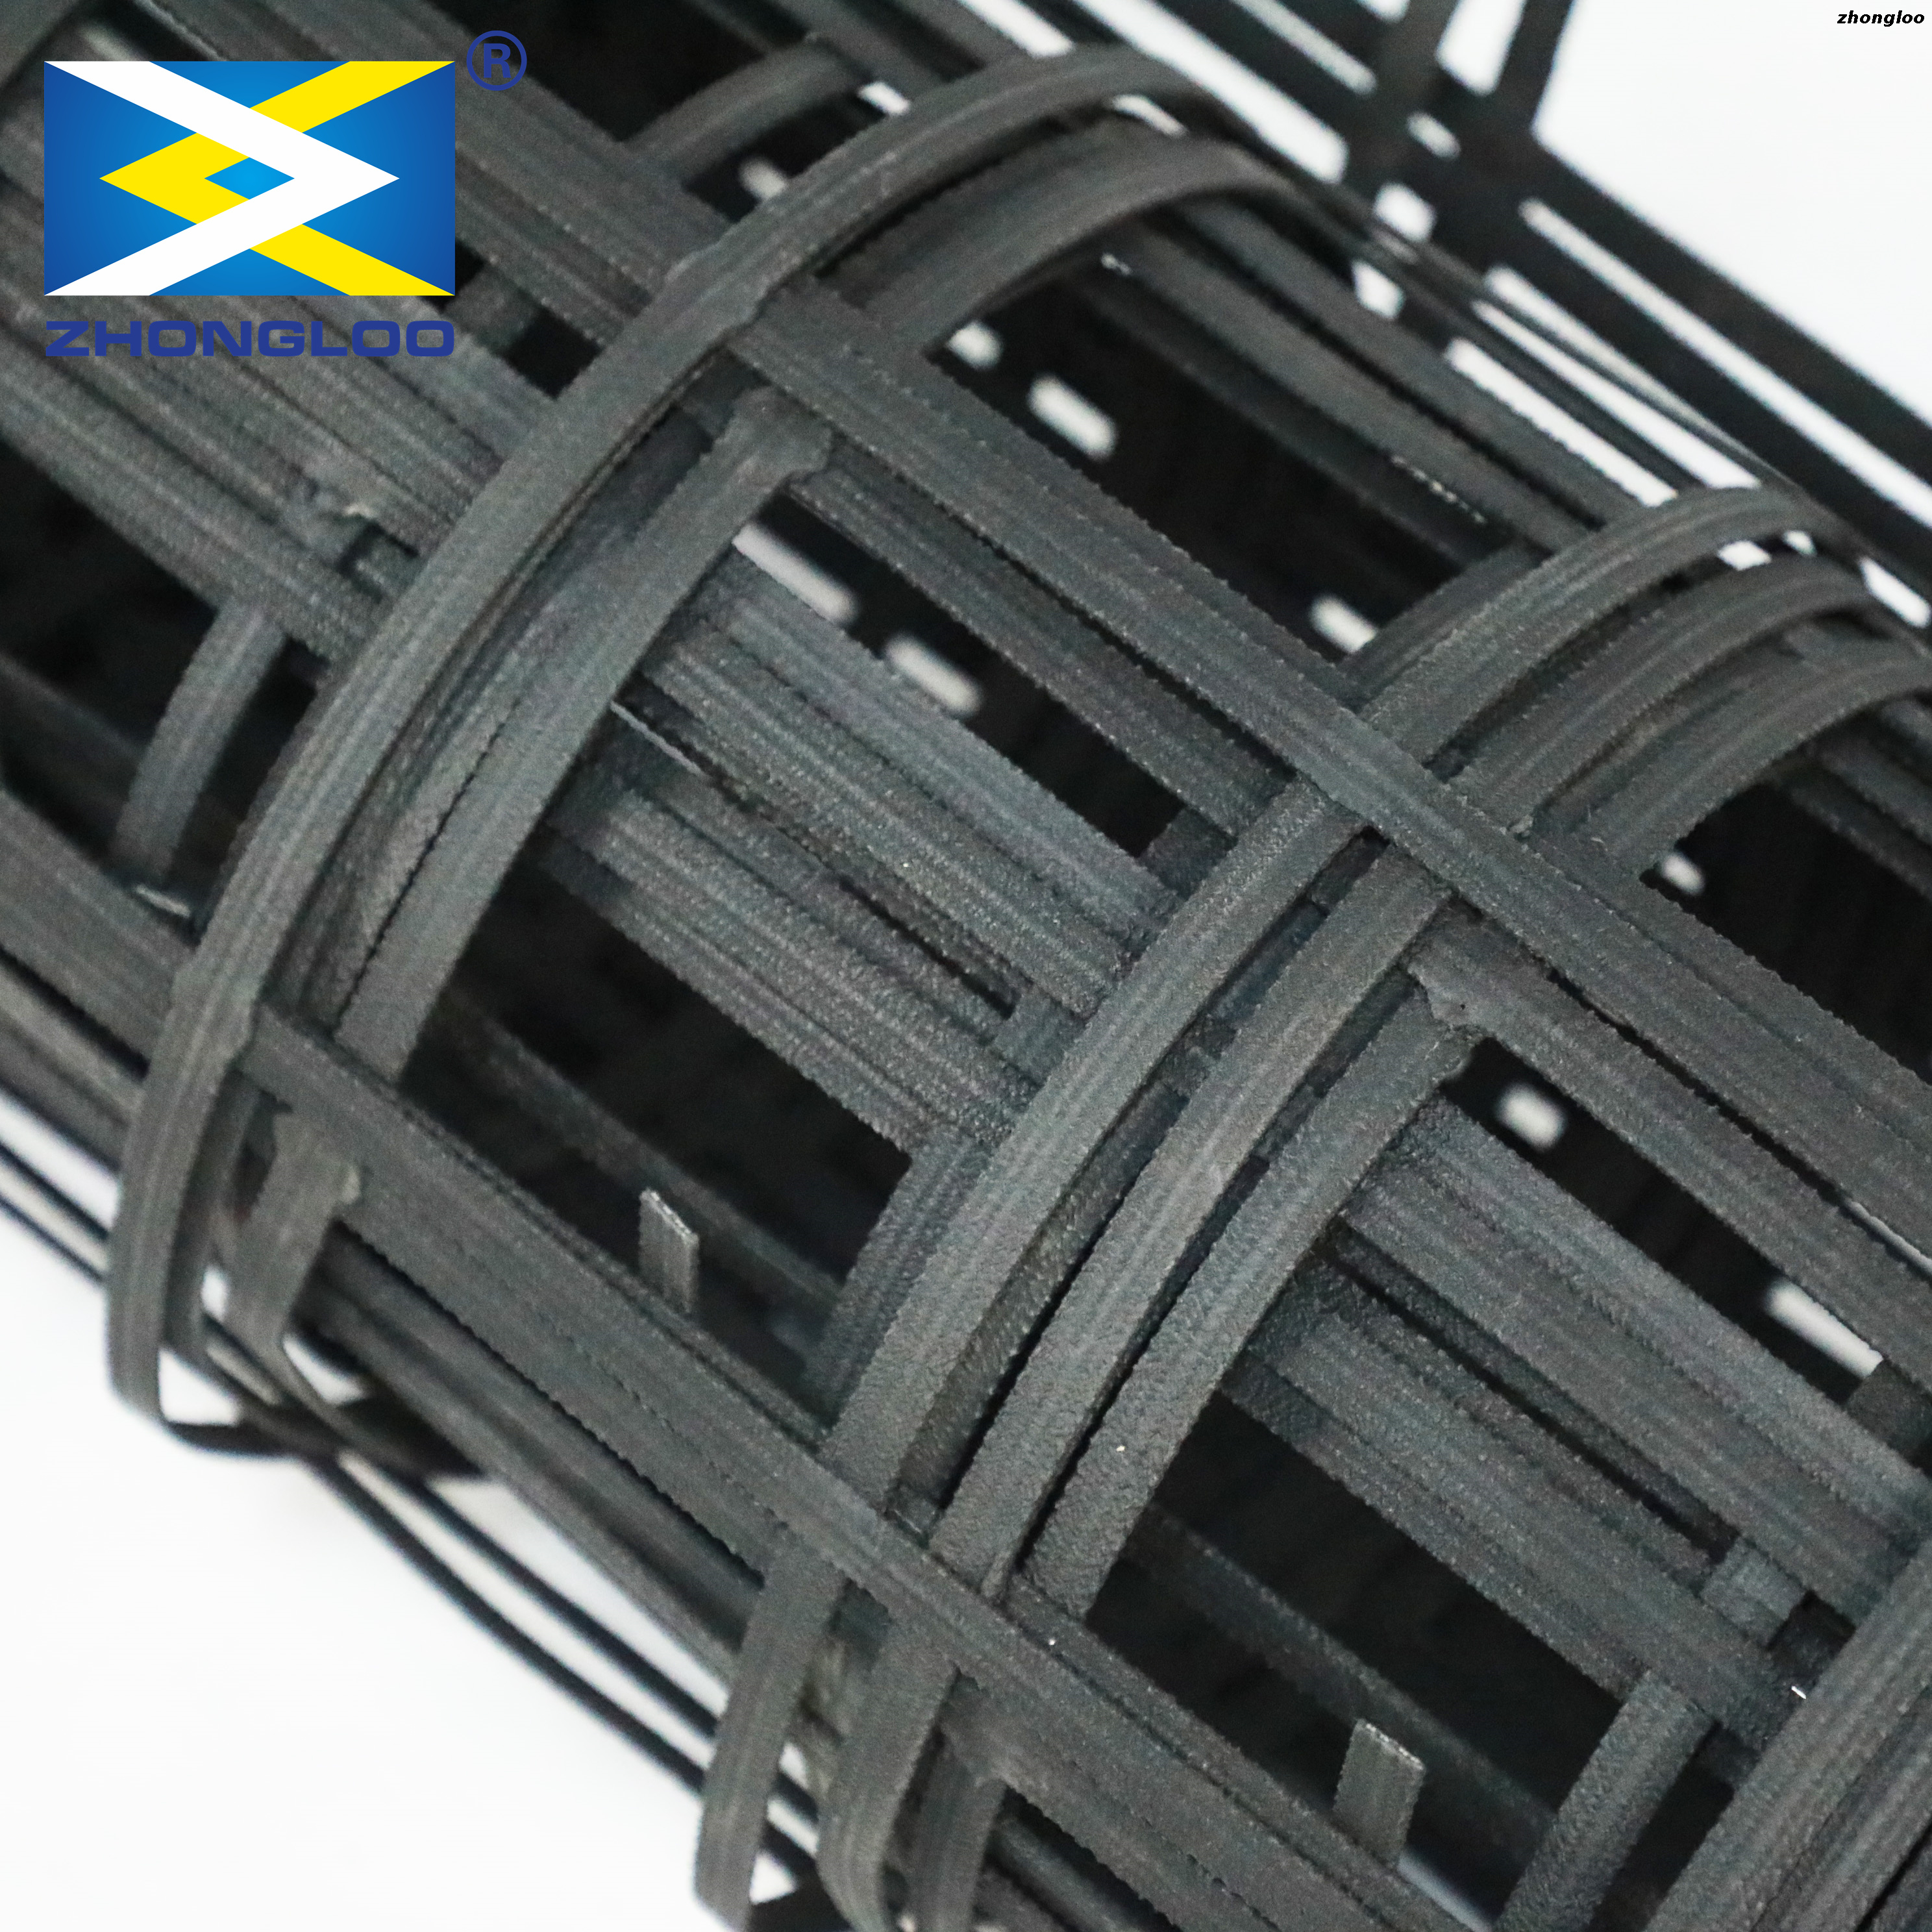 30Kn/m Steel Plastic Welding Geogrid Biaxial Geogrid for Embankment